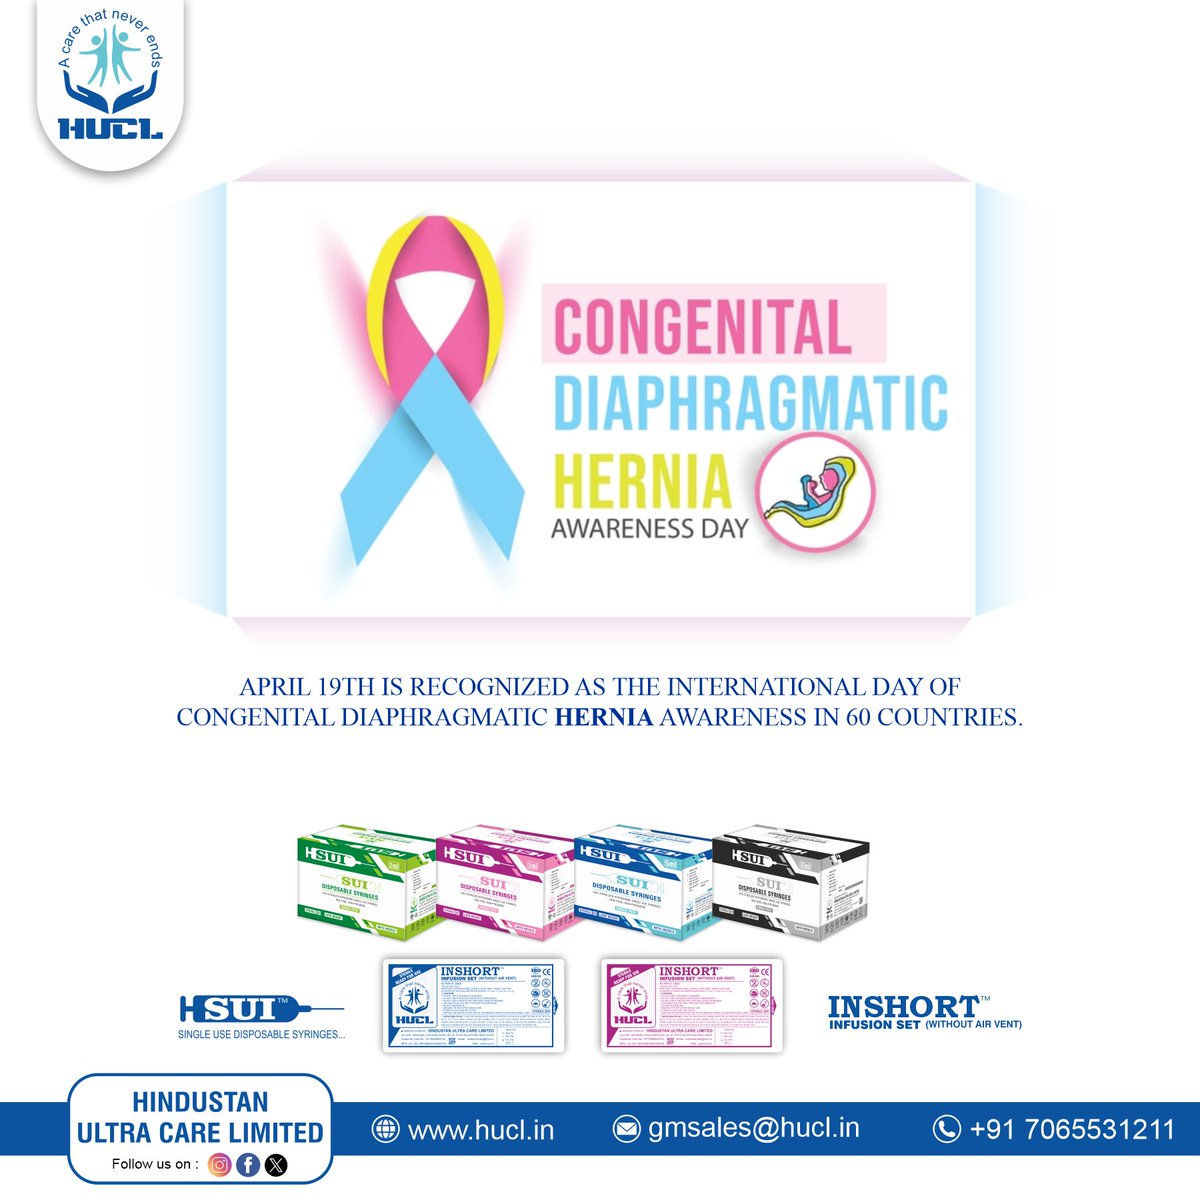 CONGENTIAL DIAPHRAGMATIC HERNIA AWARENESS DAY

APRIL 19TH IS RECOGNIZED AS THE INTERNATIONAL DAY OF
CONGENITAL DIAPHRAGMATIC HERNIA AWARENESS IN 60 COUNTRIES.

#MedicalSafety #NewProductRelease #MedicalInnovation #medicalequipment #hindustan #vaccine
#healthcareadvancements